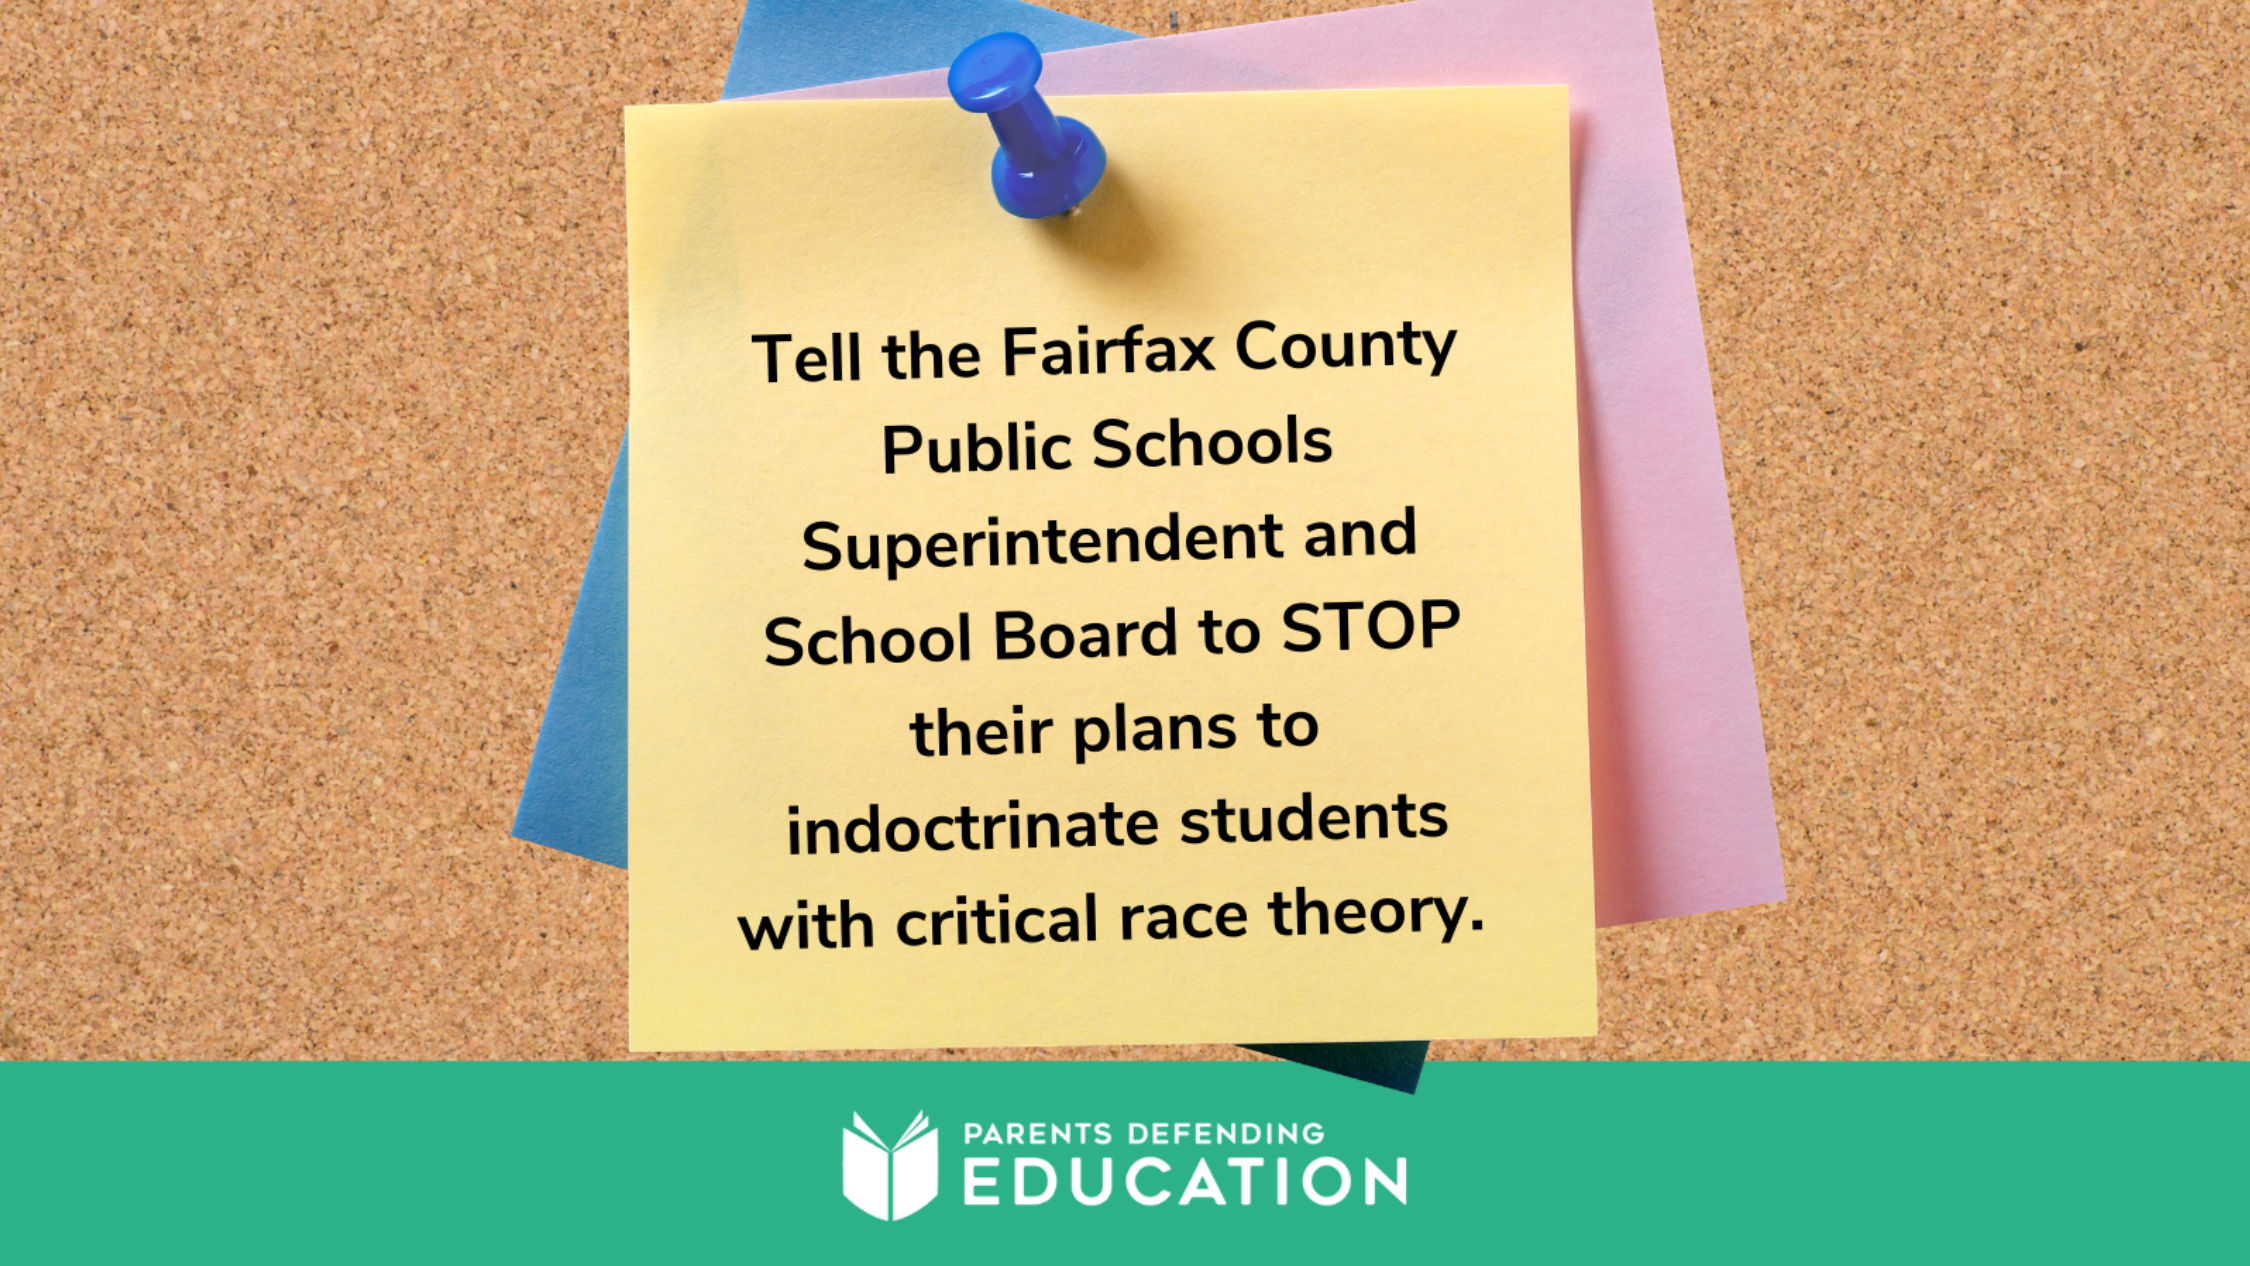 TAKE ACTION: Stop Critical Race Theory in Fairfax Schools